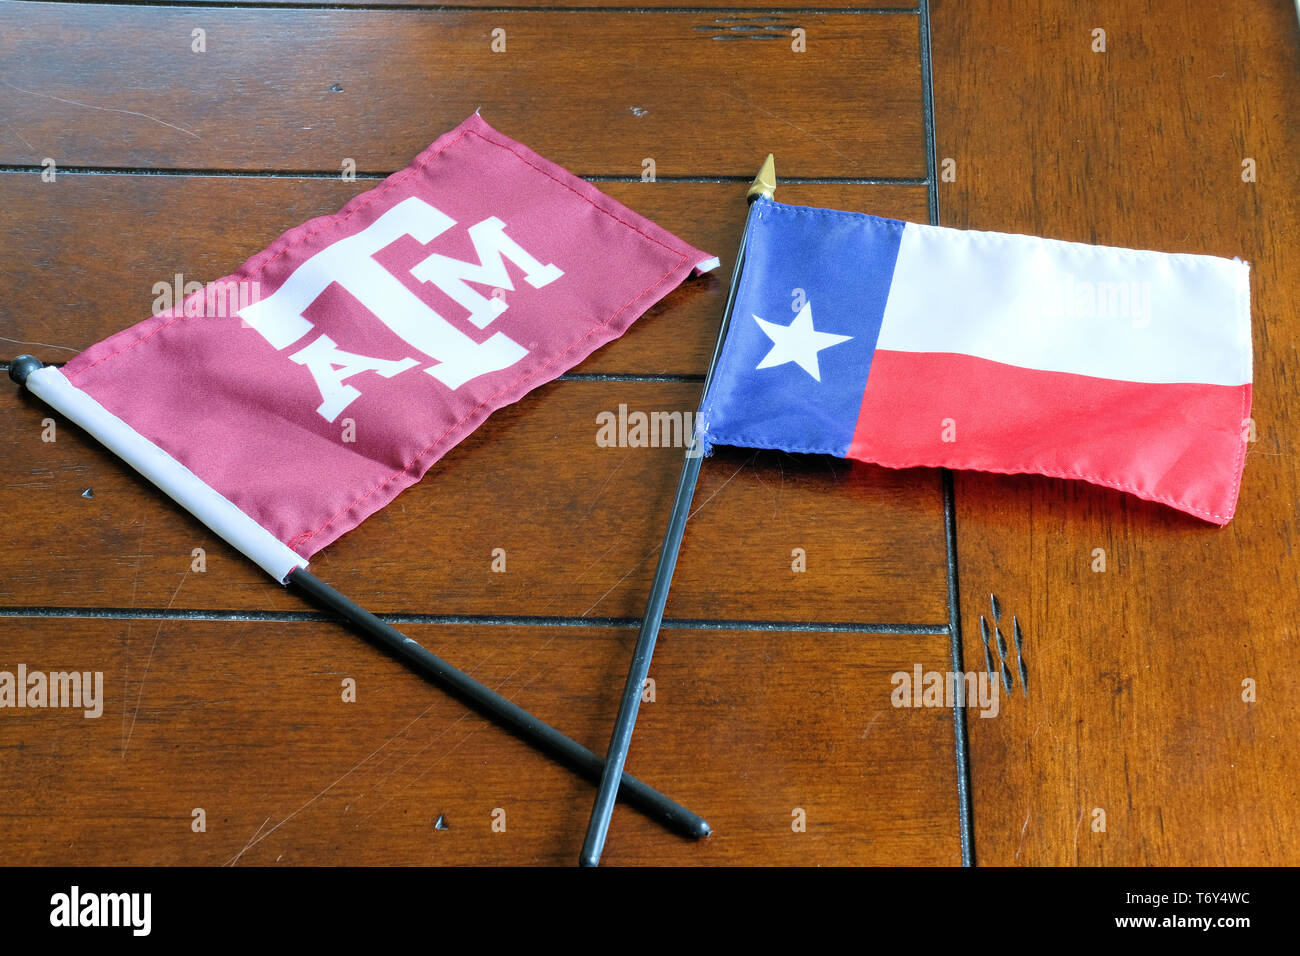 Flags of Texas and Texas A&M University; Lone Star flag and TAMU logo. Stock Photo